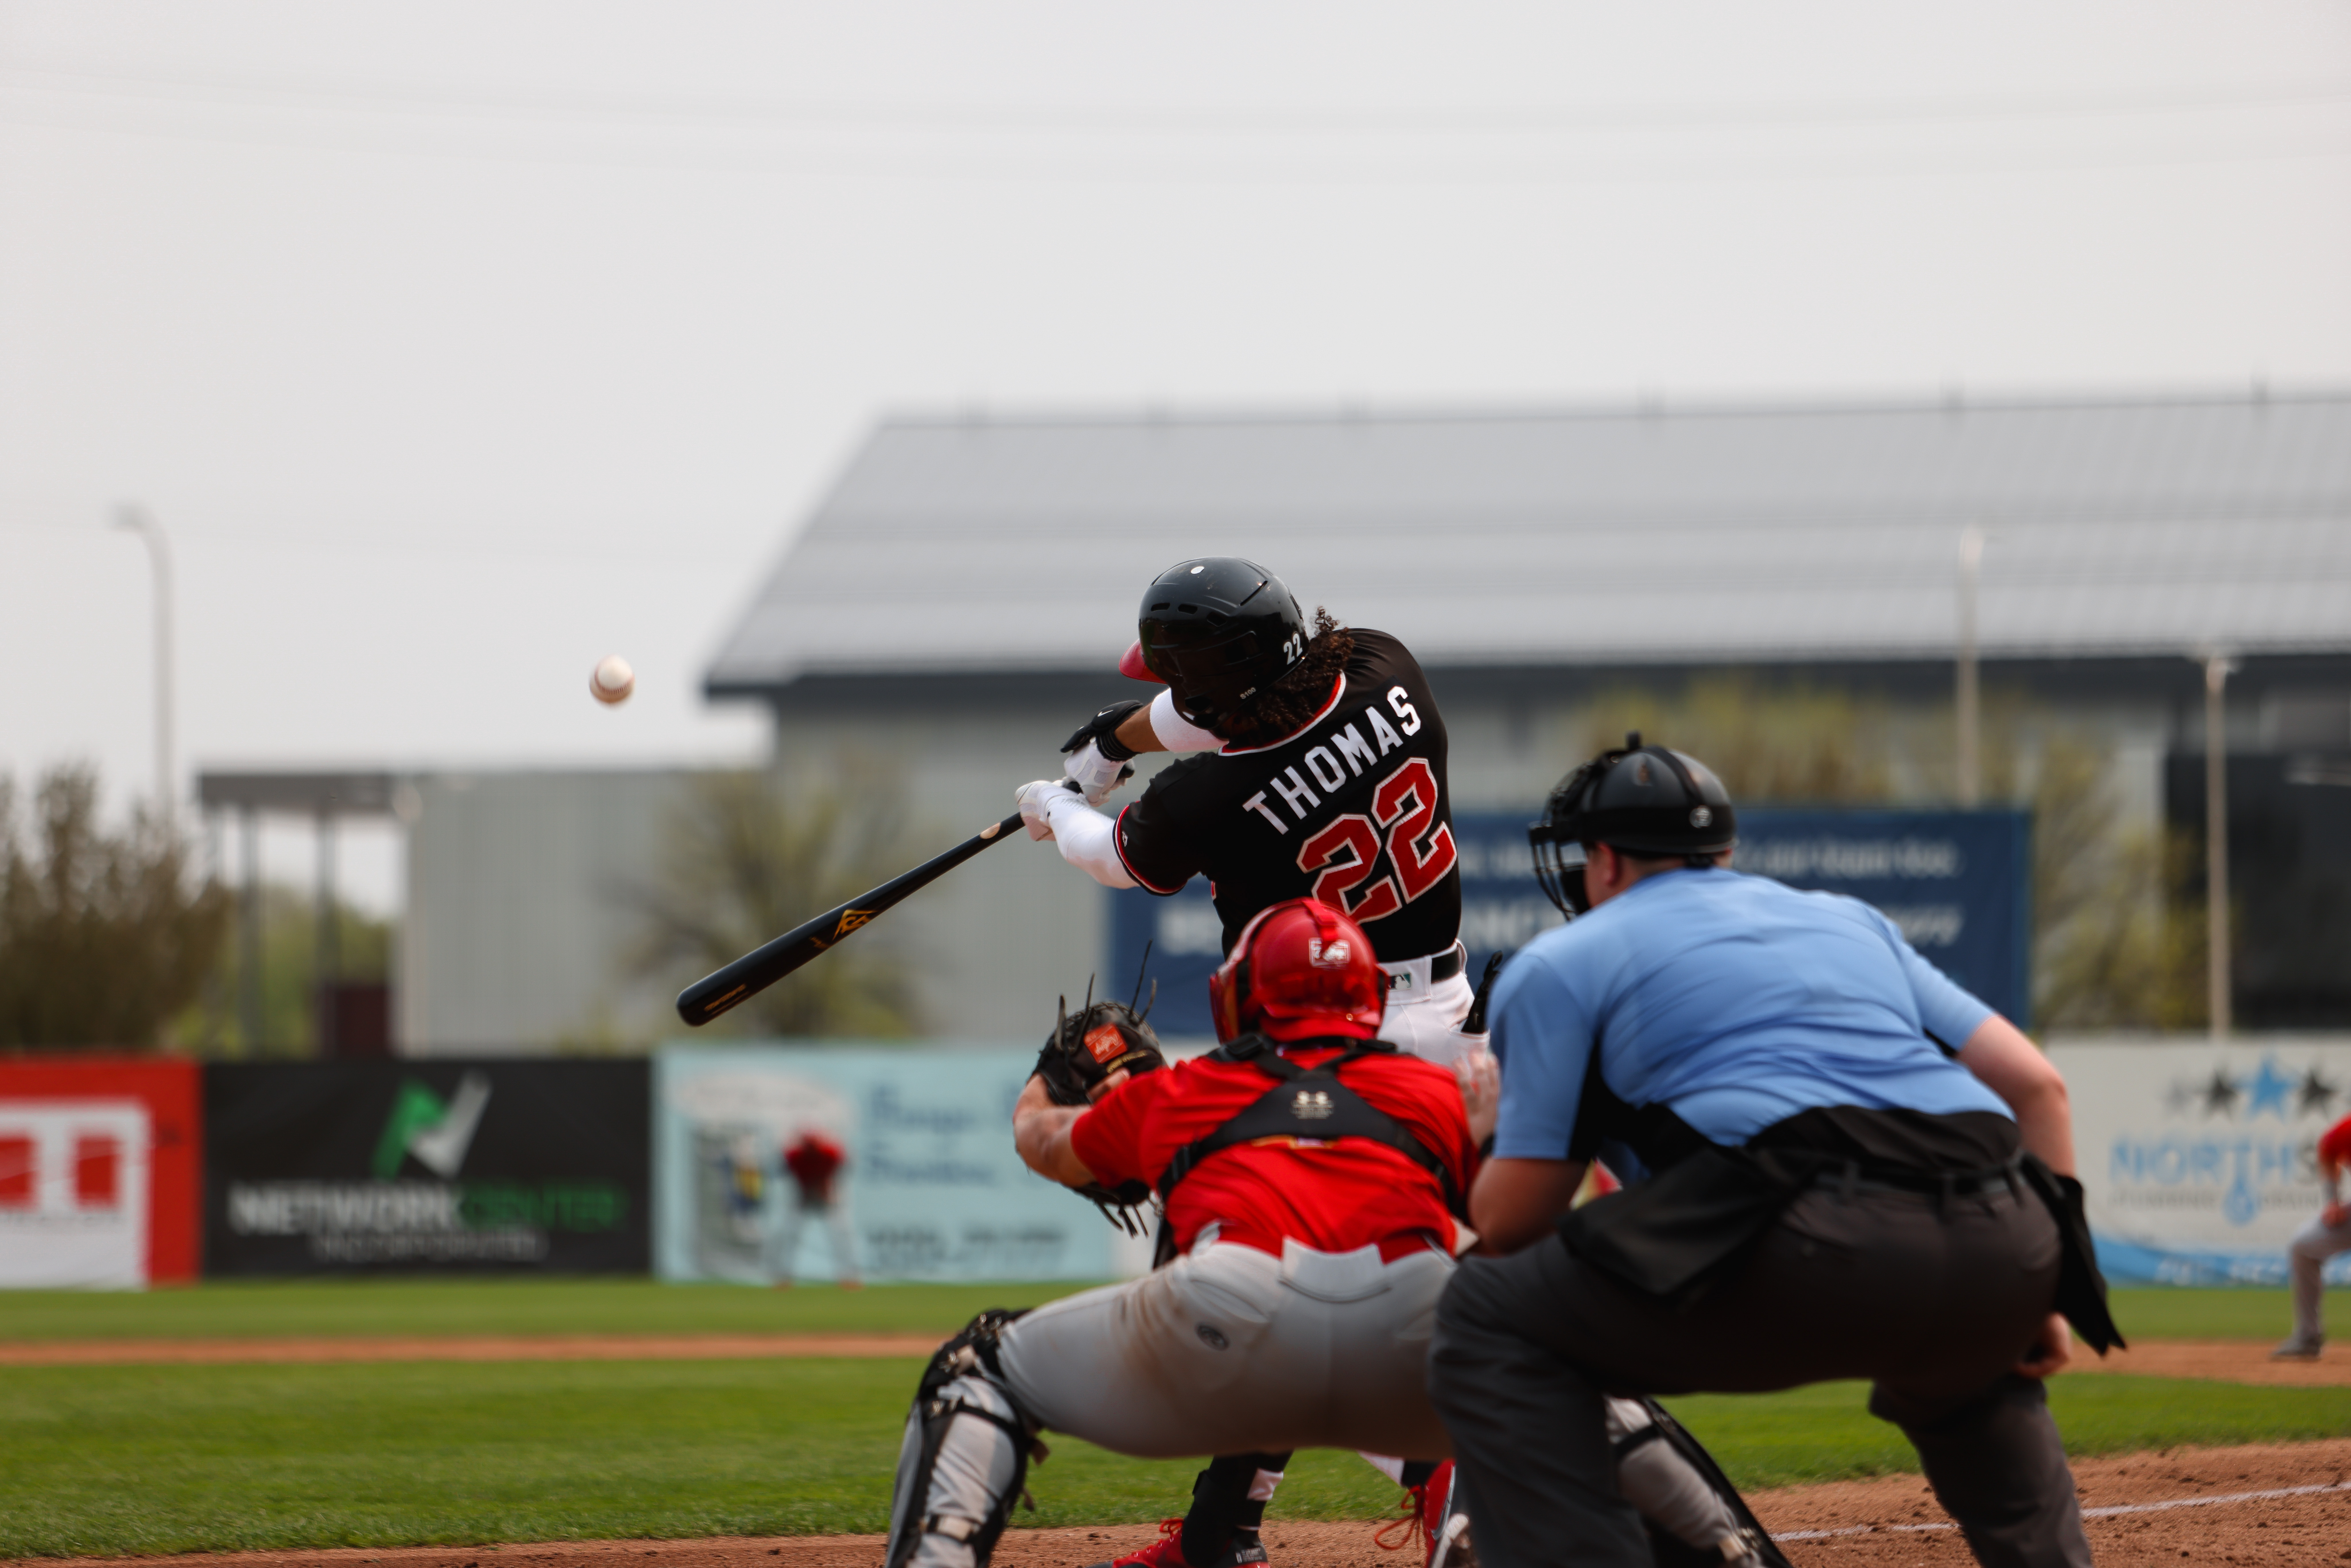 Miscues pester in loss to Goldeyes